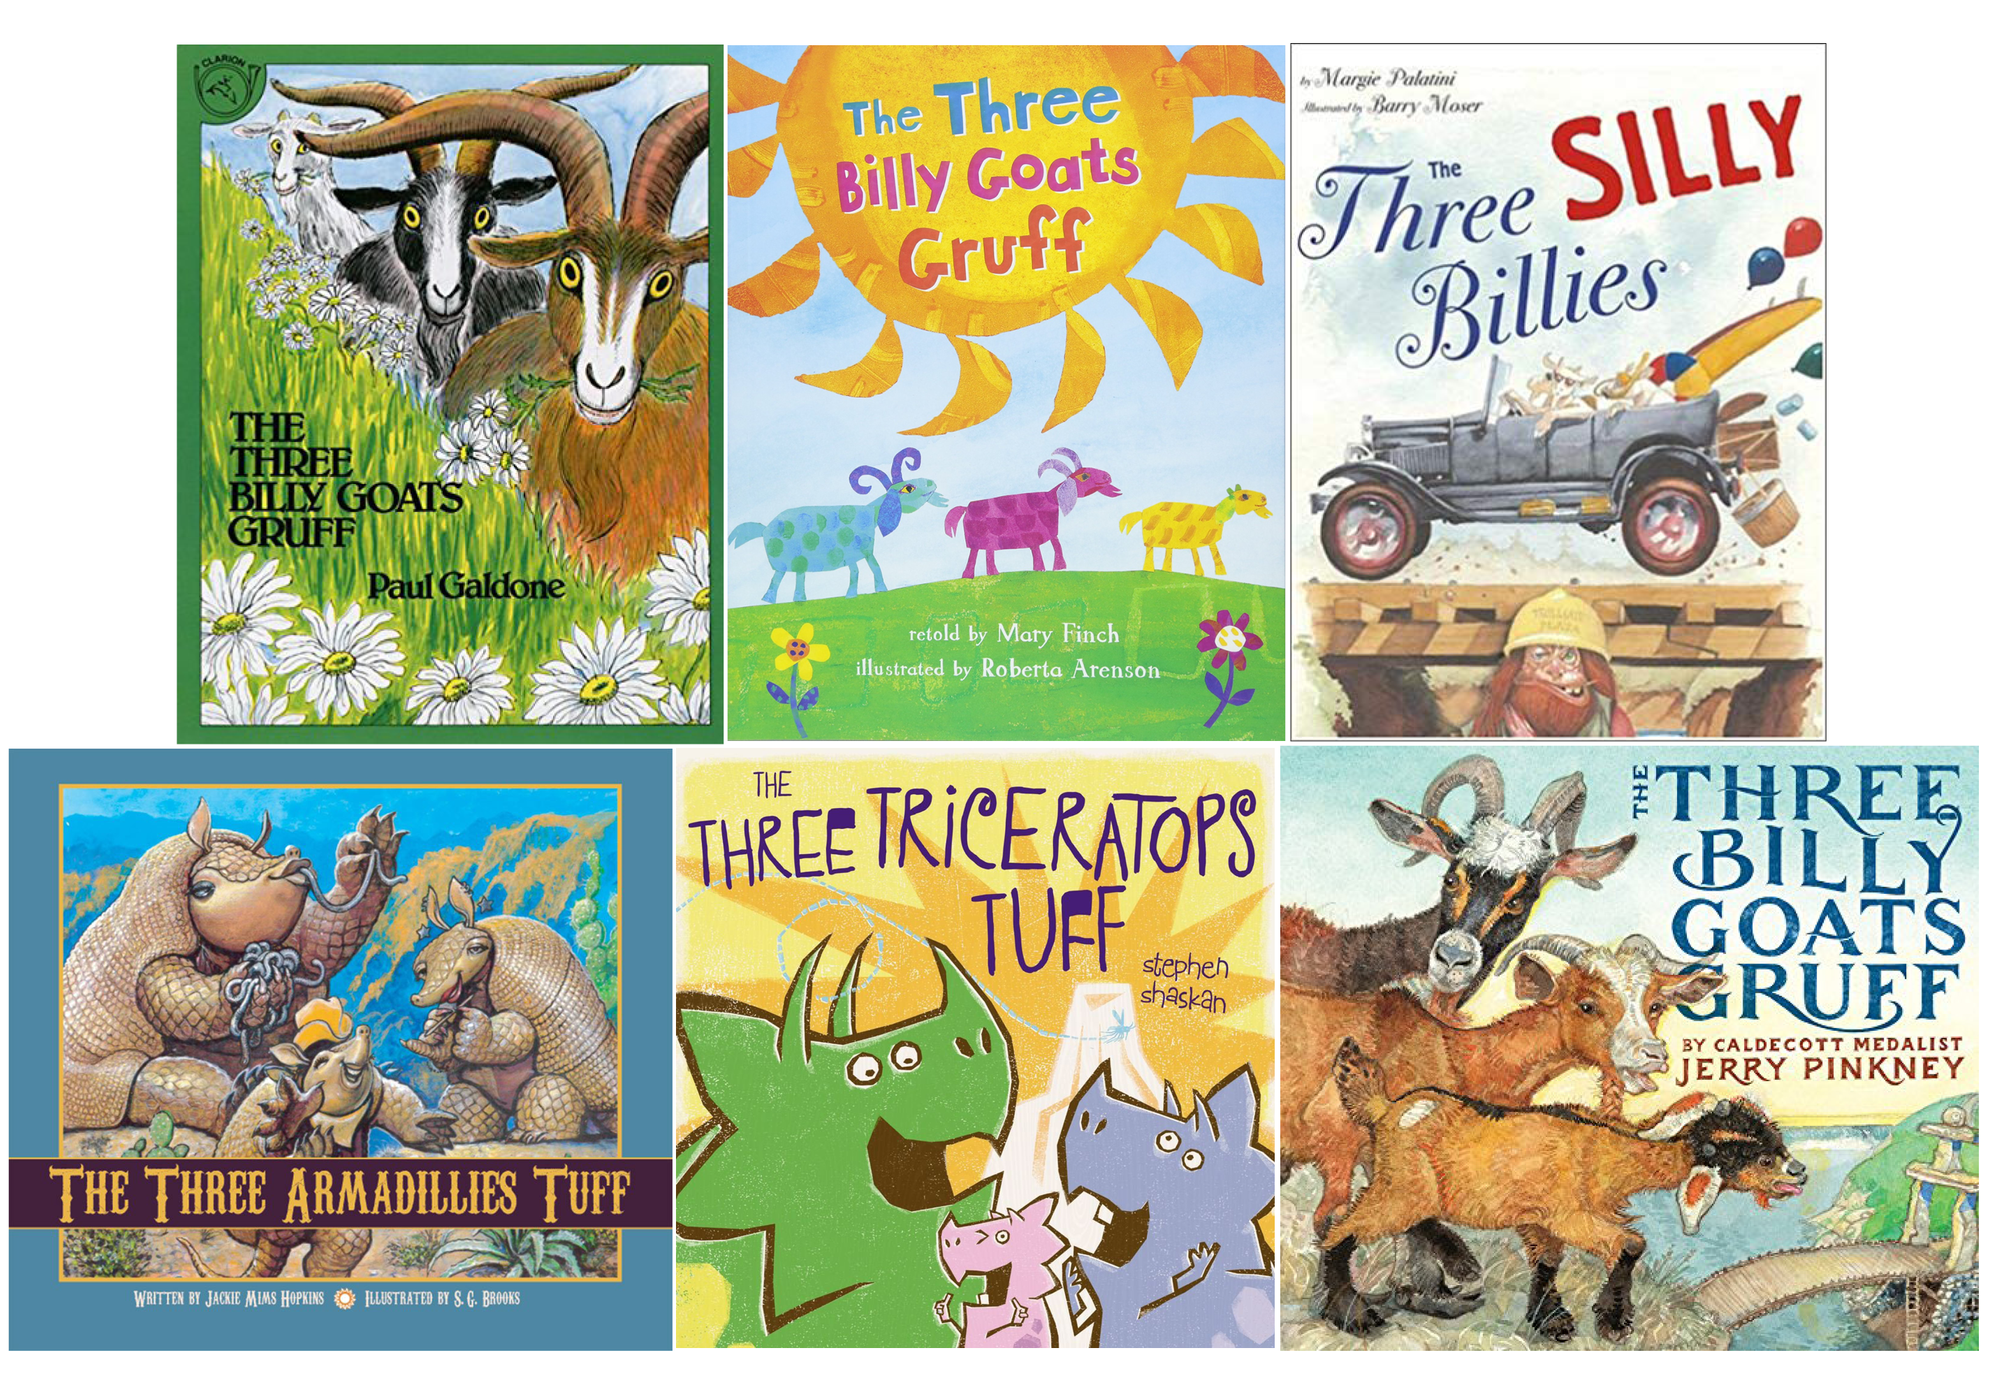 Fairy Tales & Fables Part 1: Little Red Riding Hood, The Three Billy Goats Gruff, & The Three Little Pigs